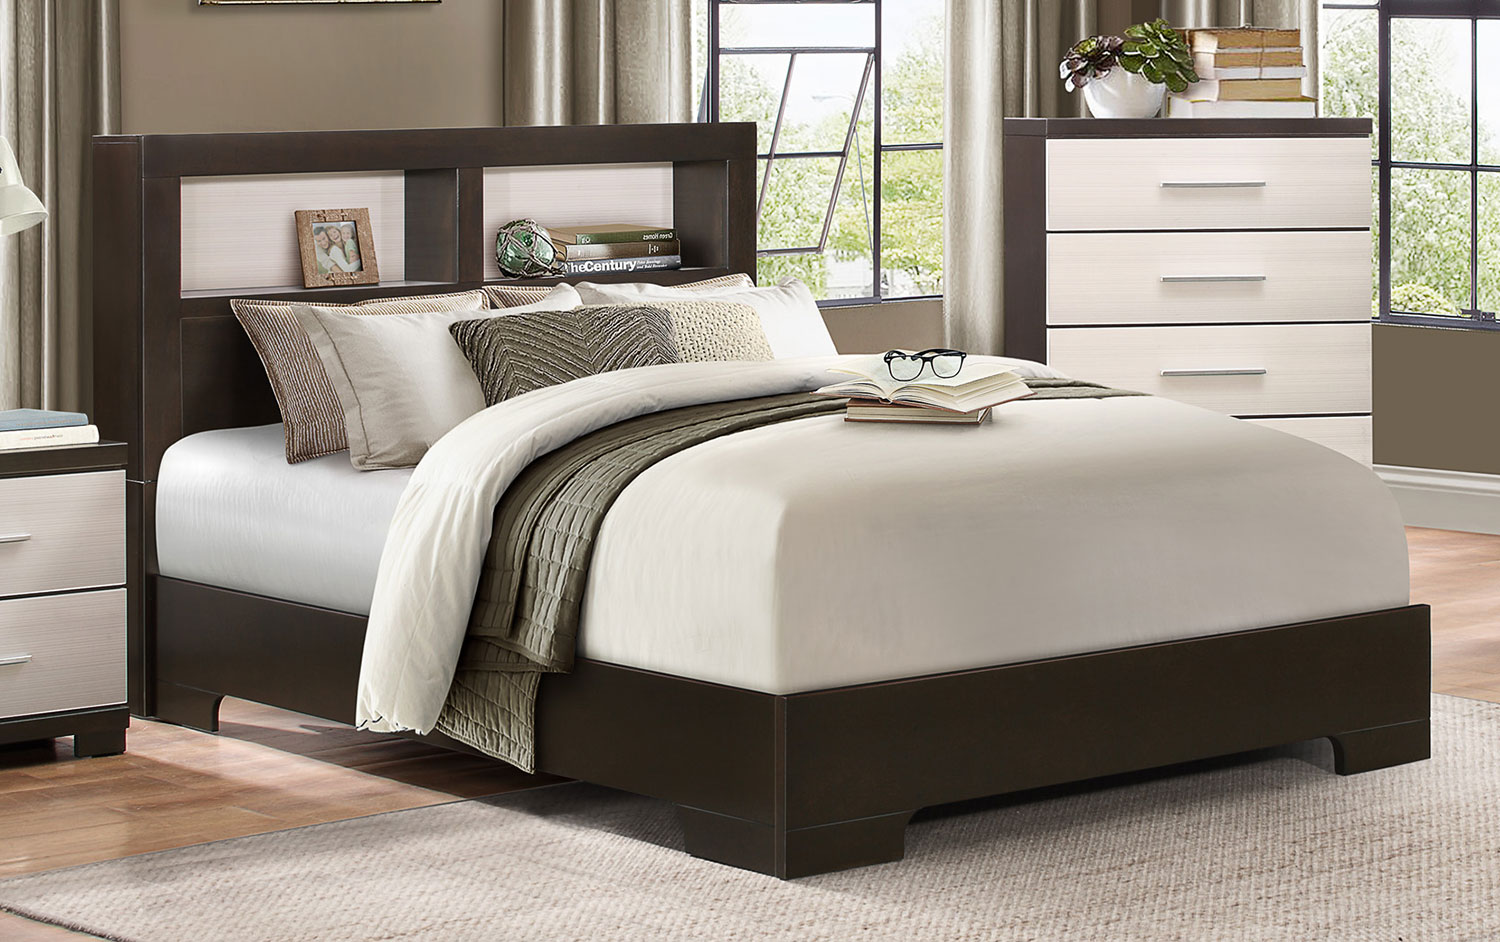 Homelegance Pell Low Profile Storage Bookcase Bed - Two-tone Espresso/White